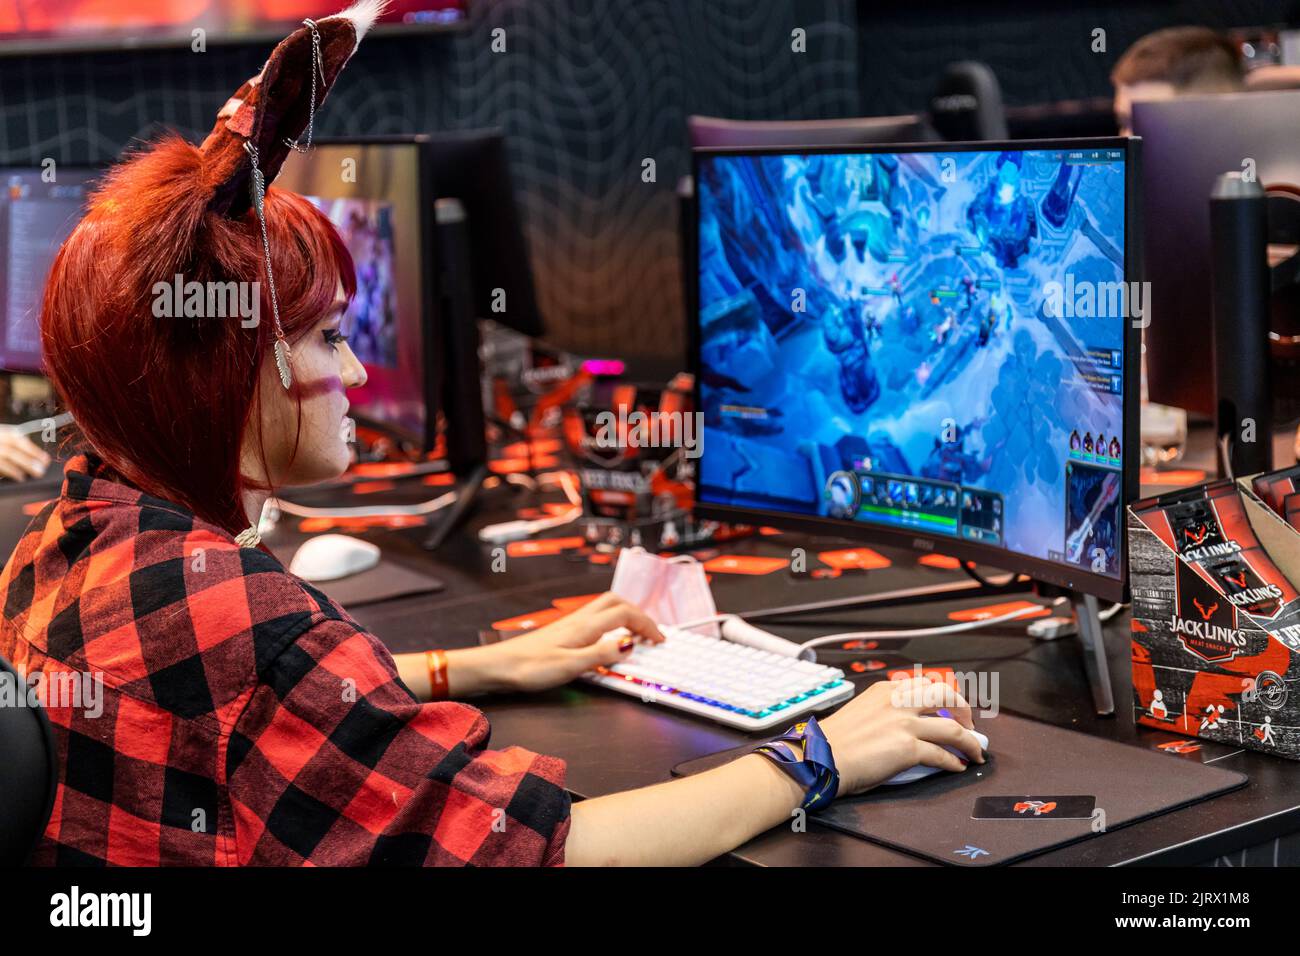 Cologne, Germany. 24th Aug, 2022. Gamescom 2022: Cosplayer plays multiplayer online battle arena game League of Legends. Gamescom is the world's largest trade fair for computer and video games, at Koelnmesse in Cologne, Germany. Photocredit: Christian Lademann / lademann.media Stock Photo